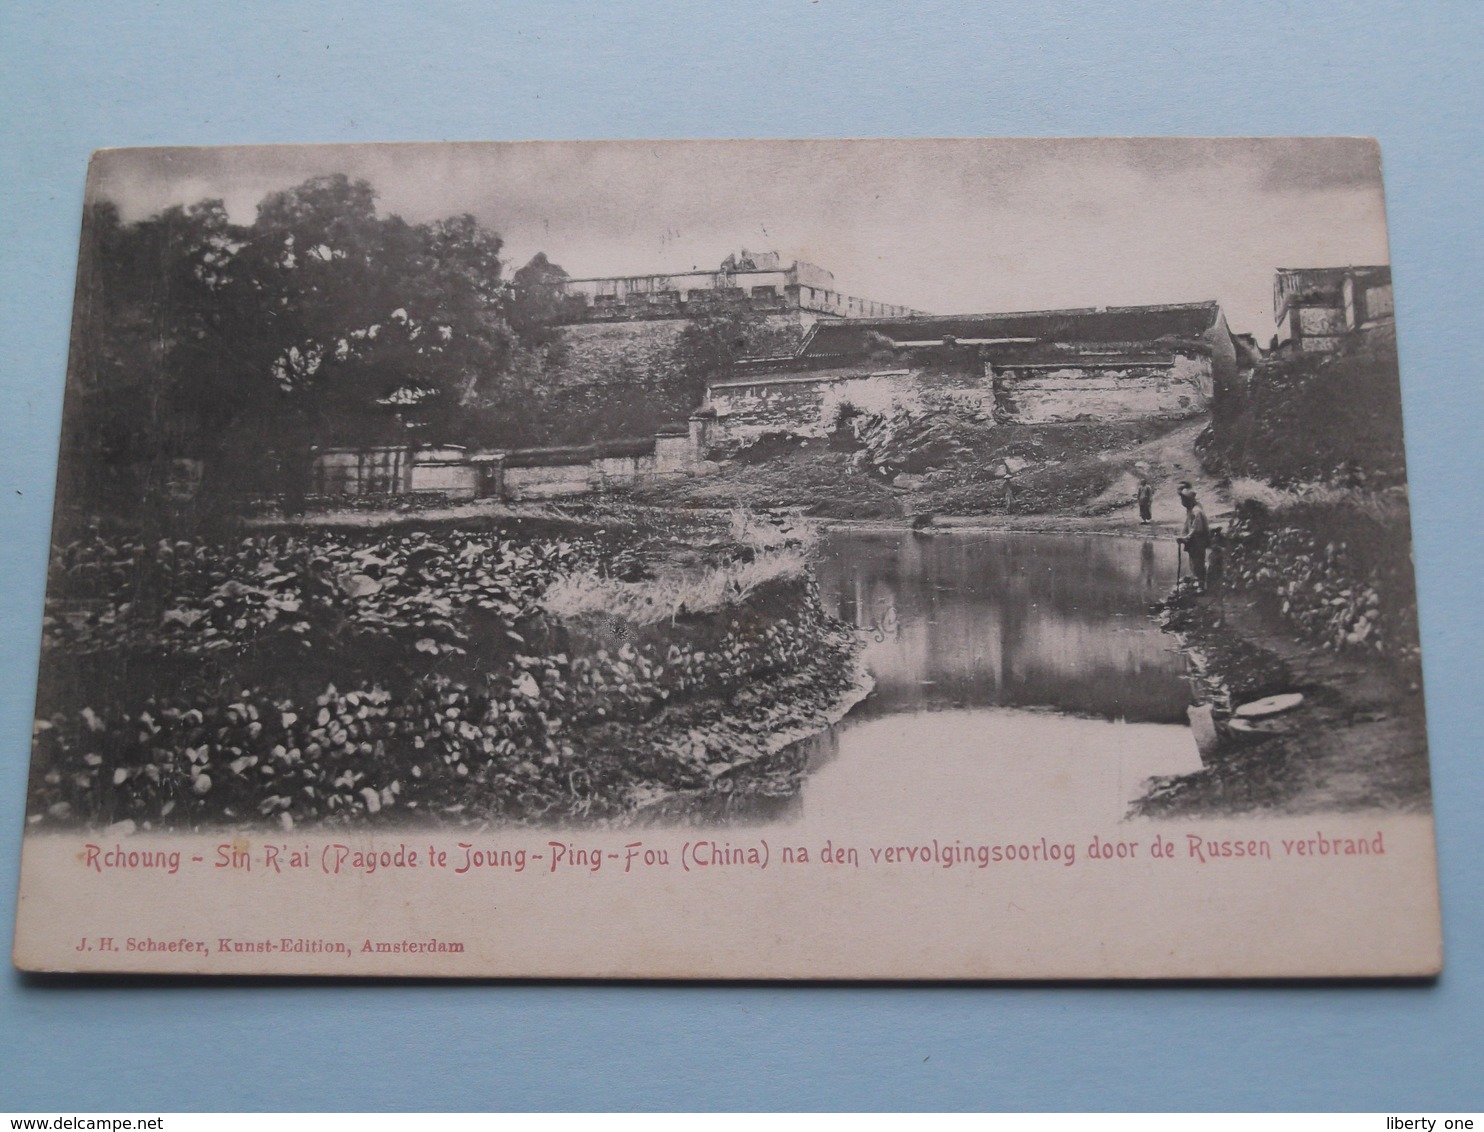 RCHOUNG - SIN R'AI ( Pagode Te JOUNG-PING-FOU ) China.( J. H. Schaefer ) Anno 1909 ( See / Voir Photo Svp ) ! - Chine